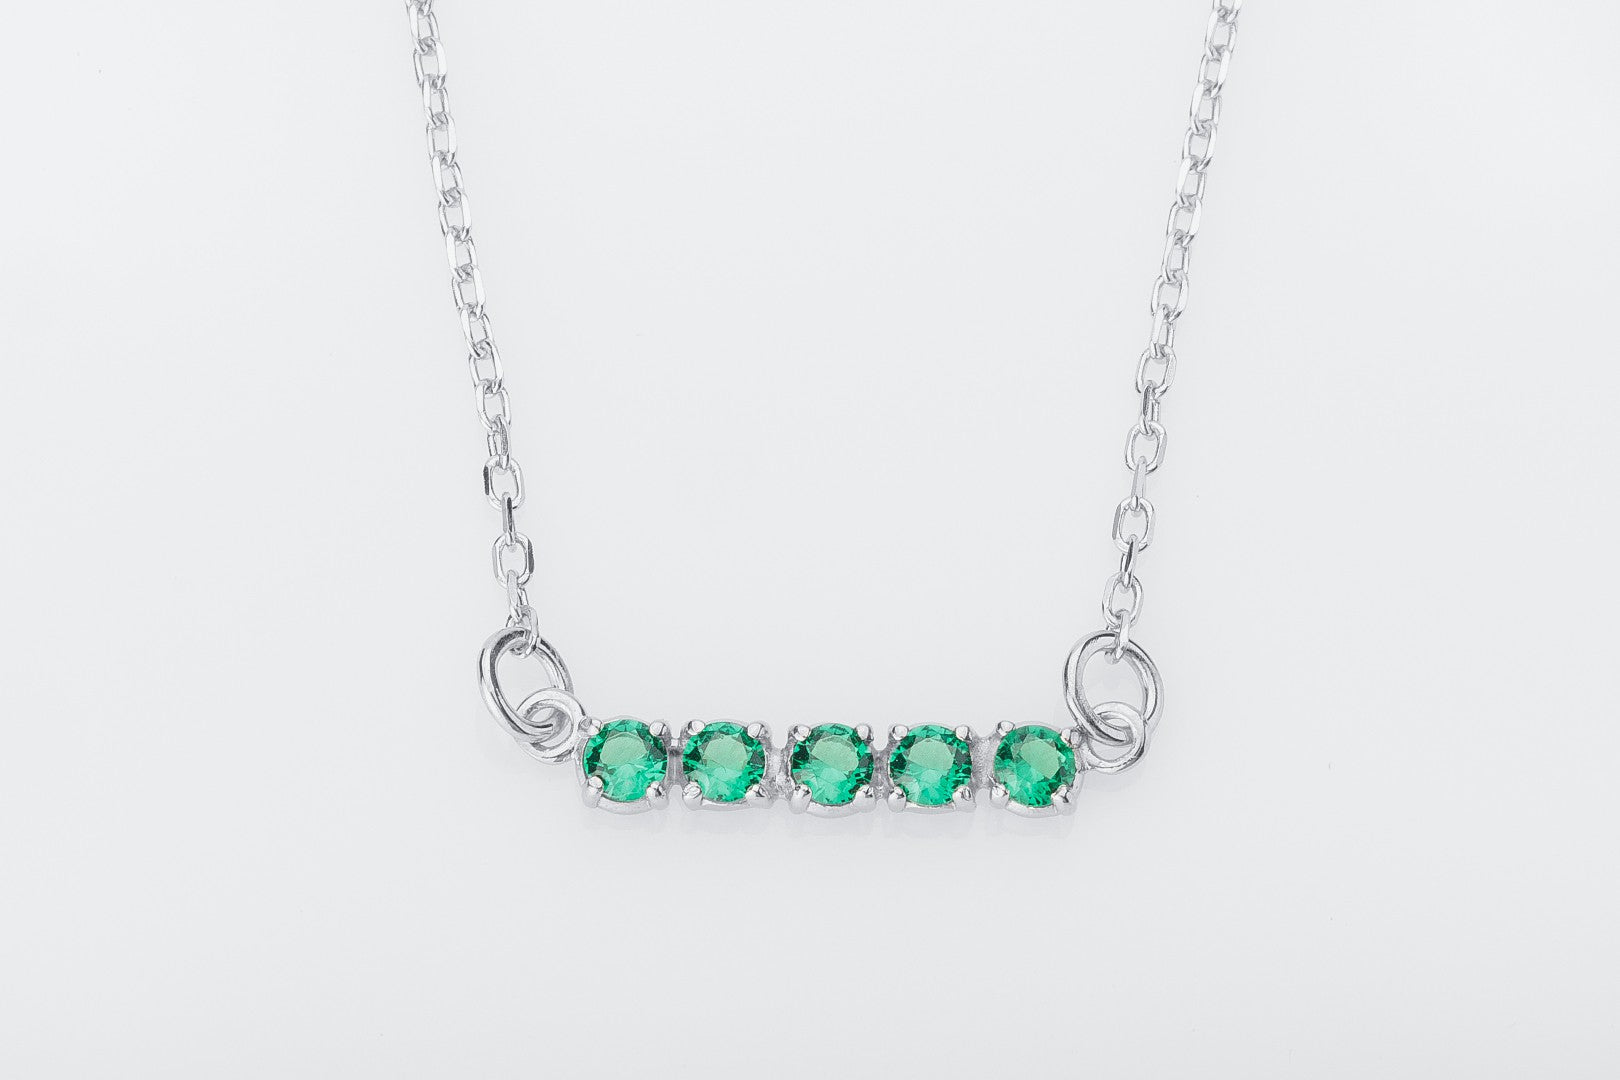 Minimalistic Necklace with Green Gems, 925 Silver